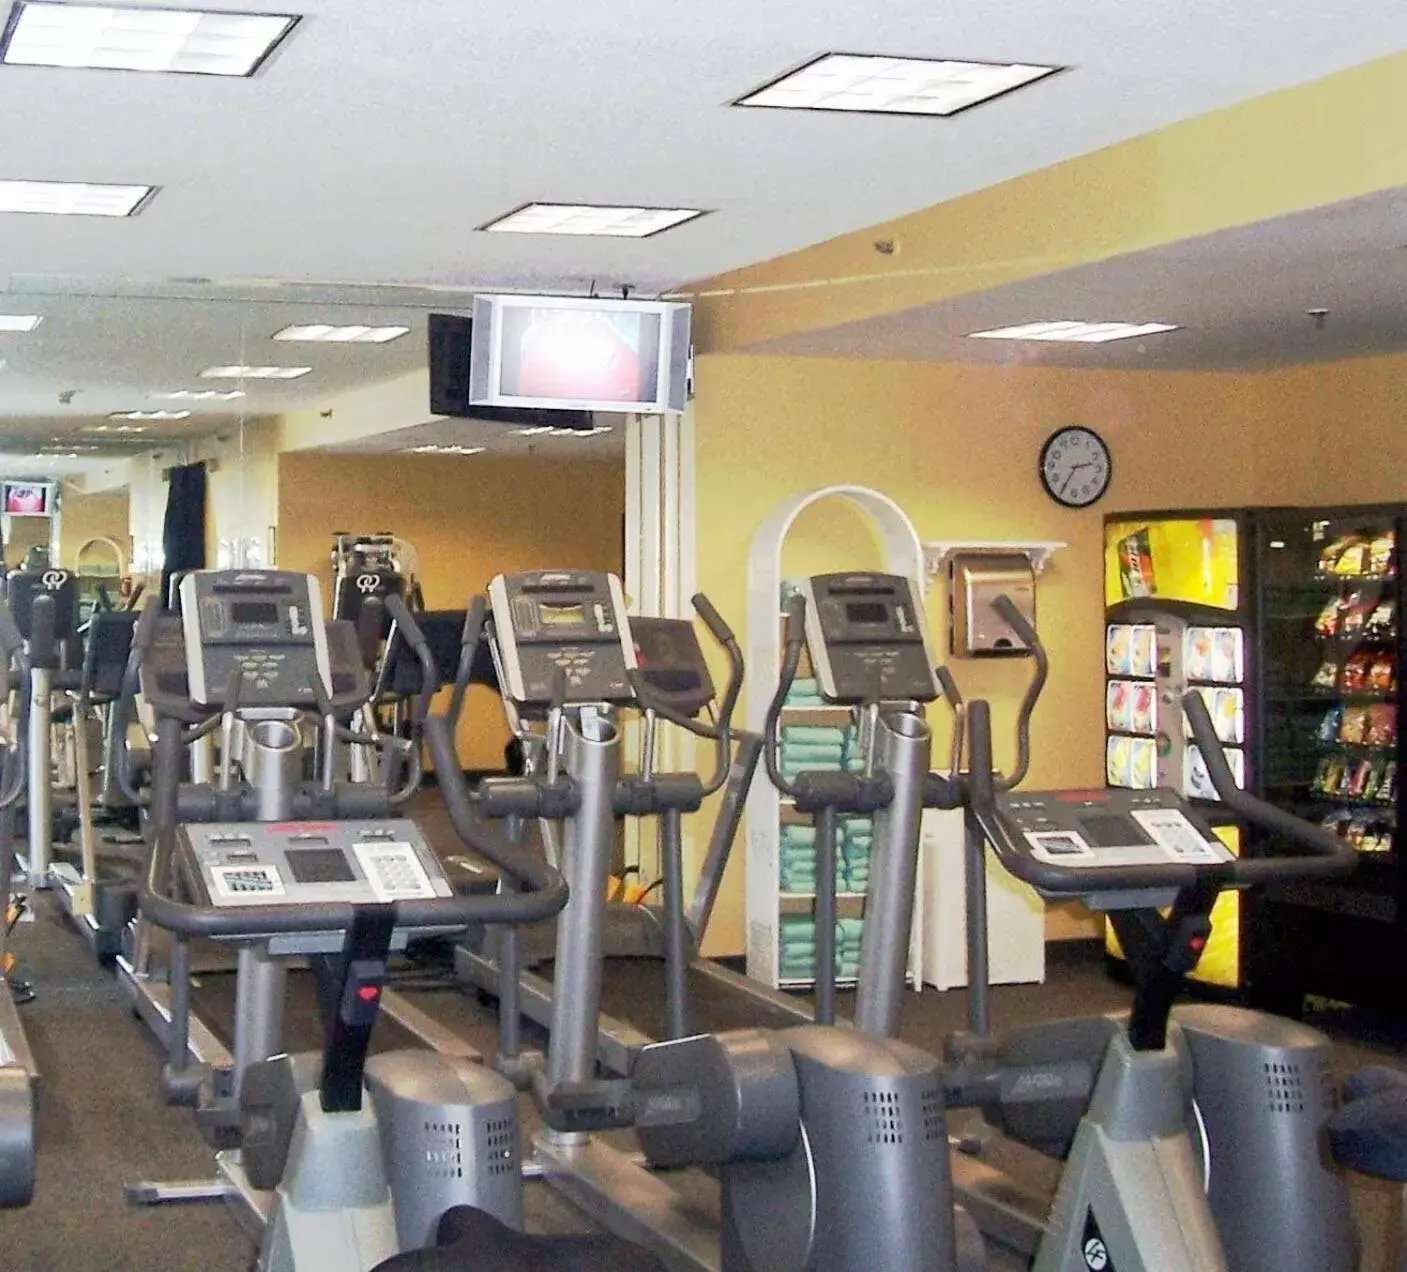 Fitness centre/facilities, Fitness Center/Facilities in DoubleTree by Hilton Hotel & Executive Meeting Center Somerset